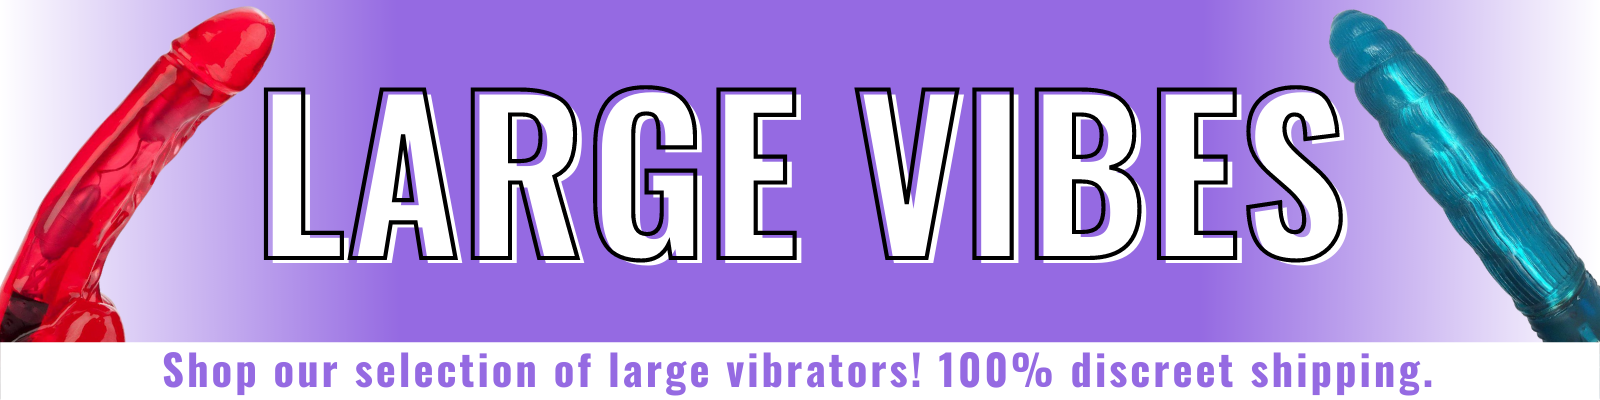 Banner for our large vibrators collection. Banner reads: Large vibes. Shop our selection of large vibrators! 100% discreet shipping.